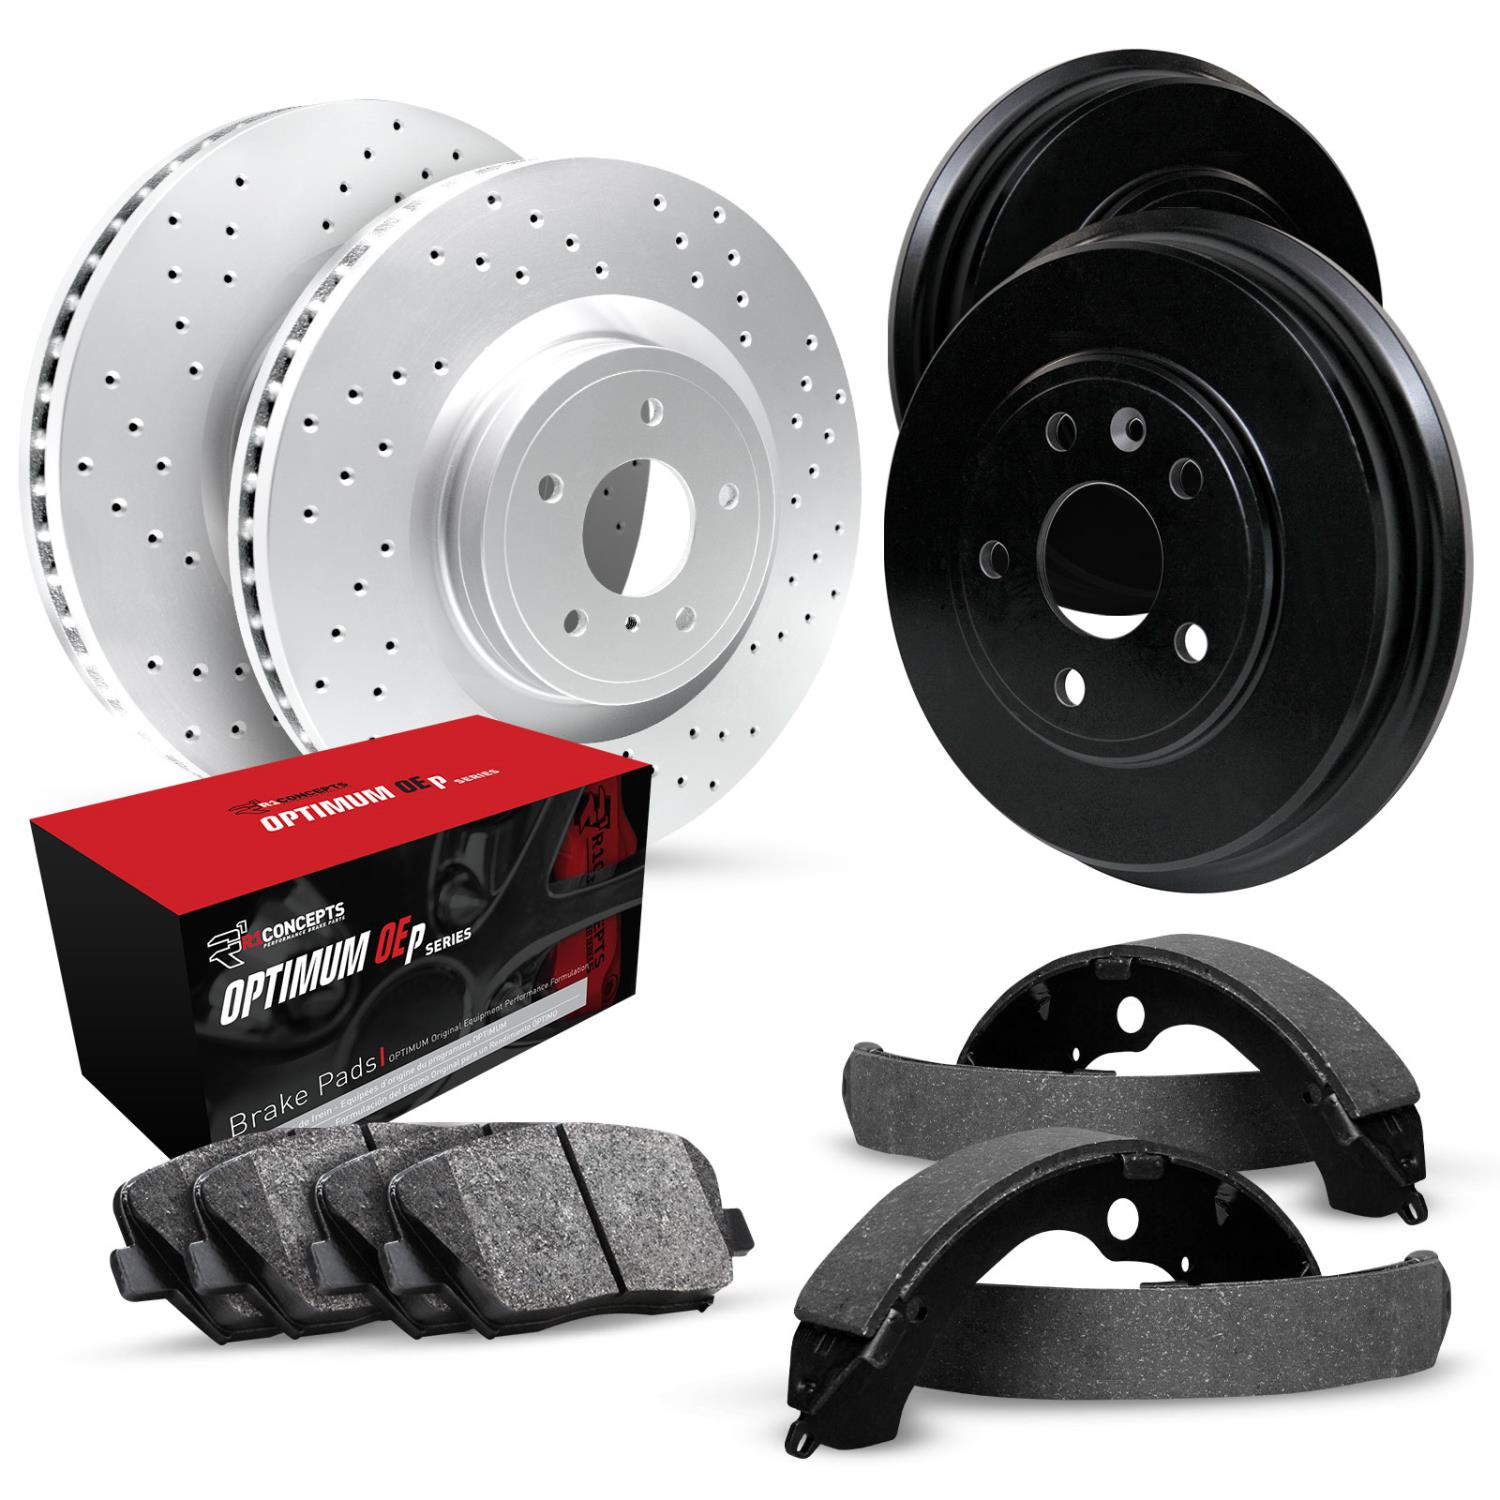 GEO-Carbon Drilled Brake Rotor & Drum Set w/Optimum OE Pads & Shoes, 1976-1989 GM, Position: Front & Rear